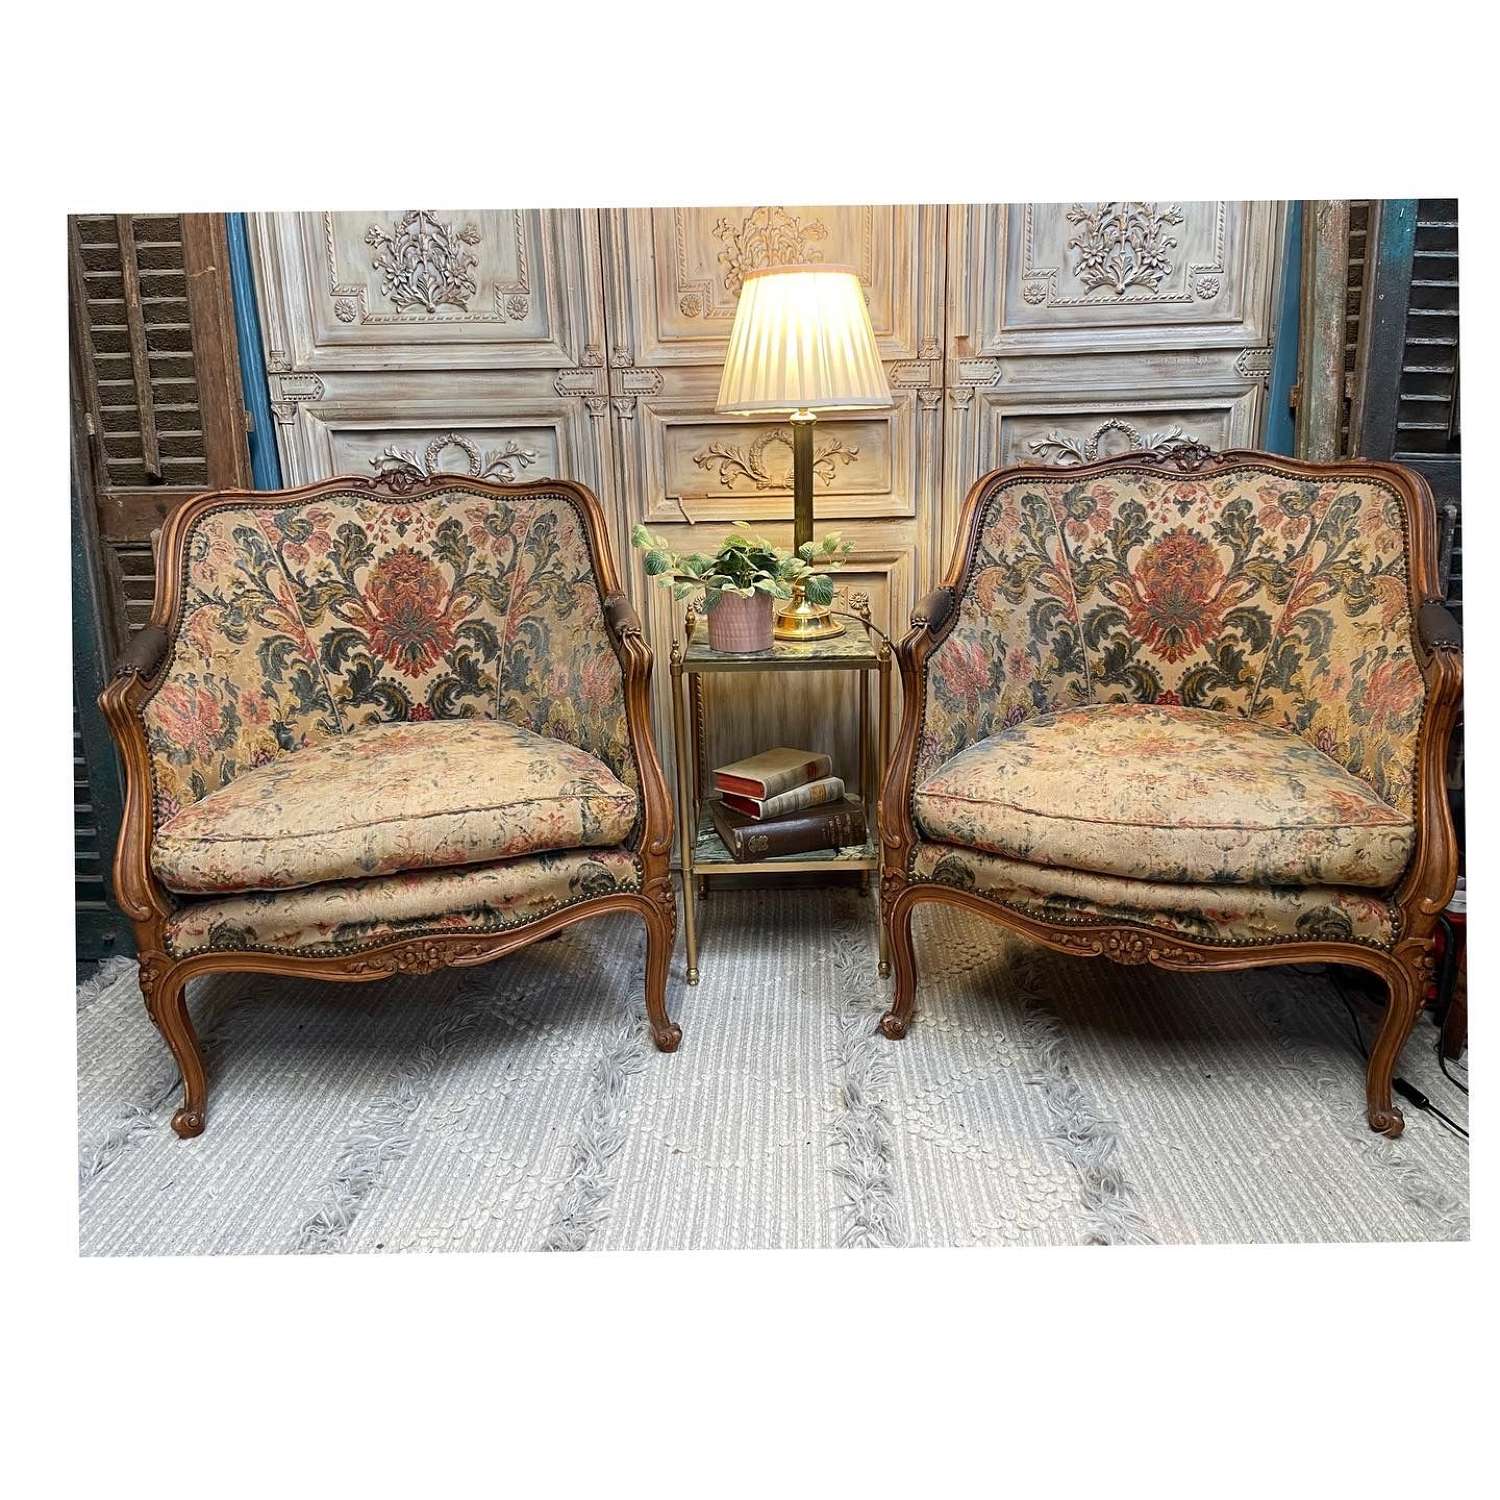 Pair of French Armchairs c1920-30, original fabric